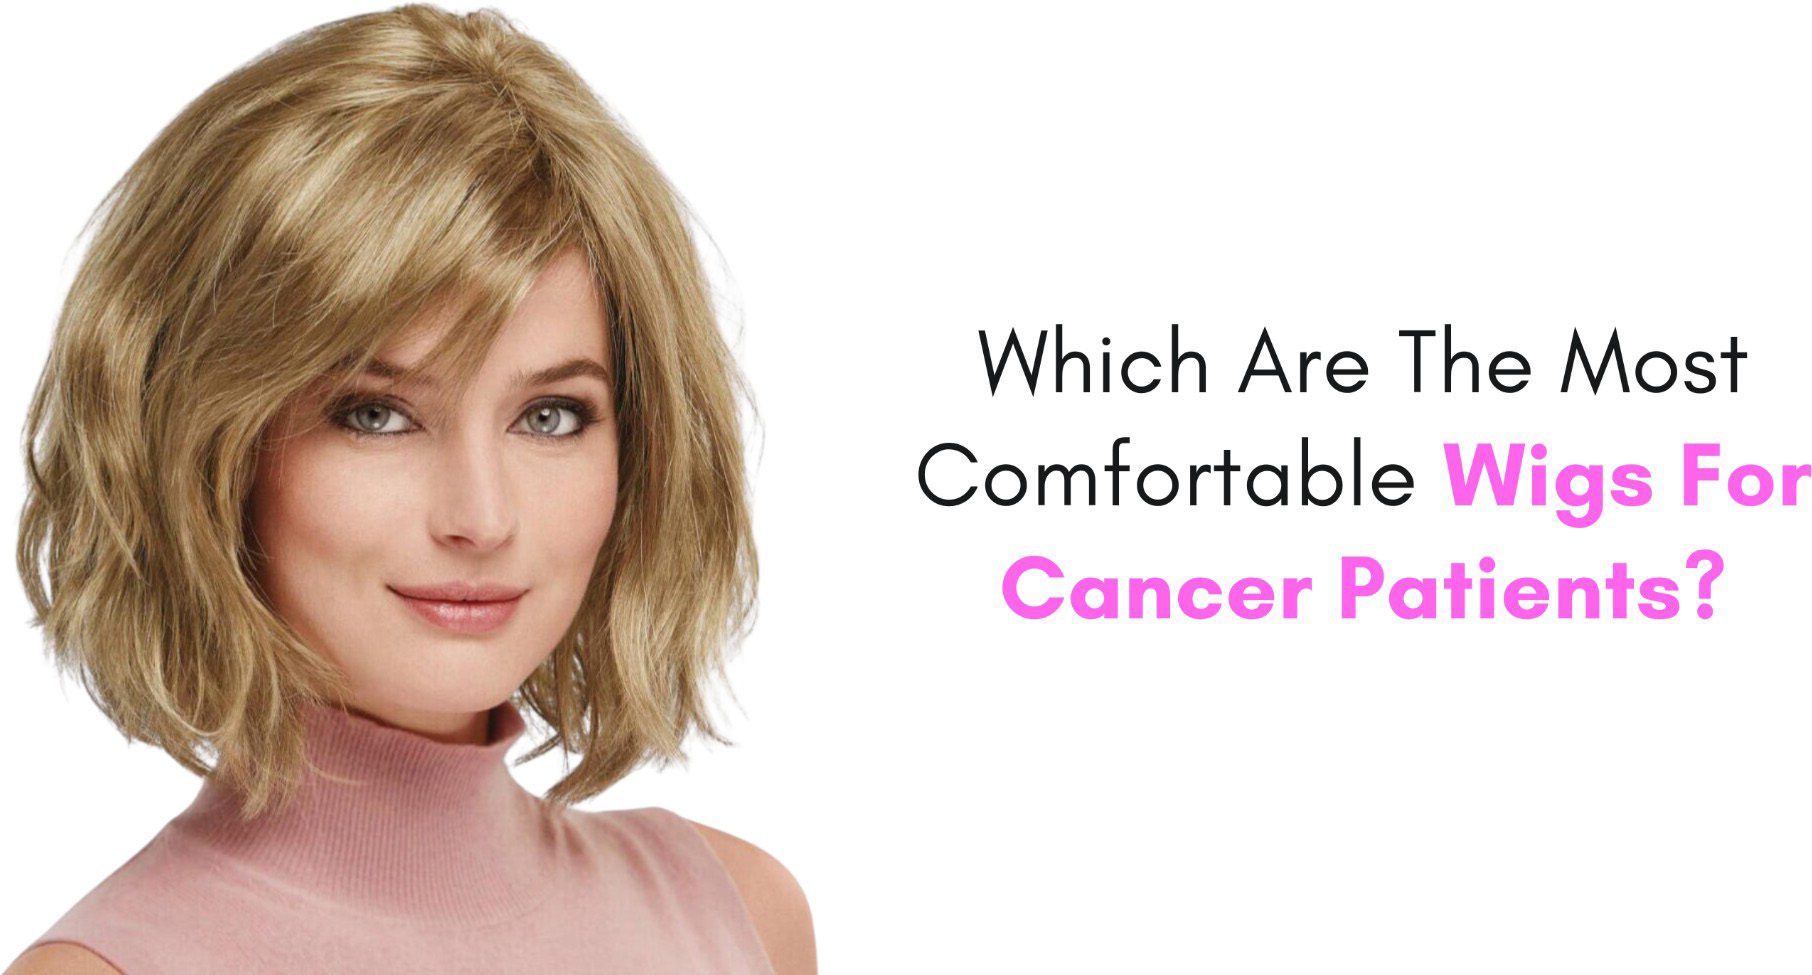 Which Are The Most Comfortable Wigs For Cancer Patients?